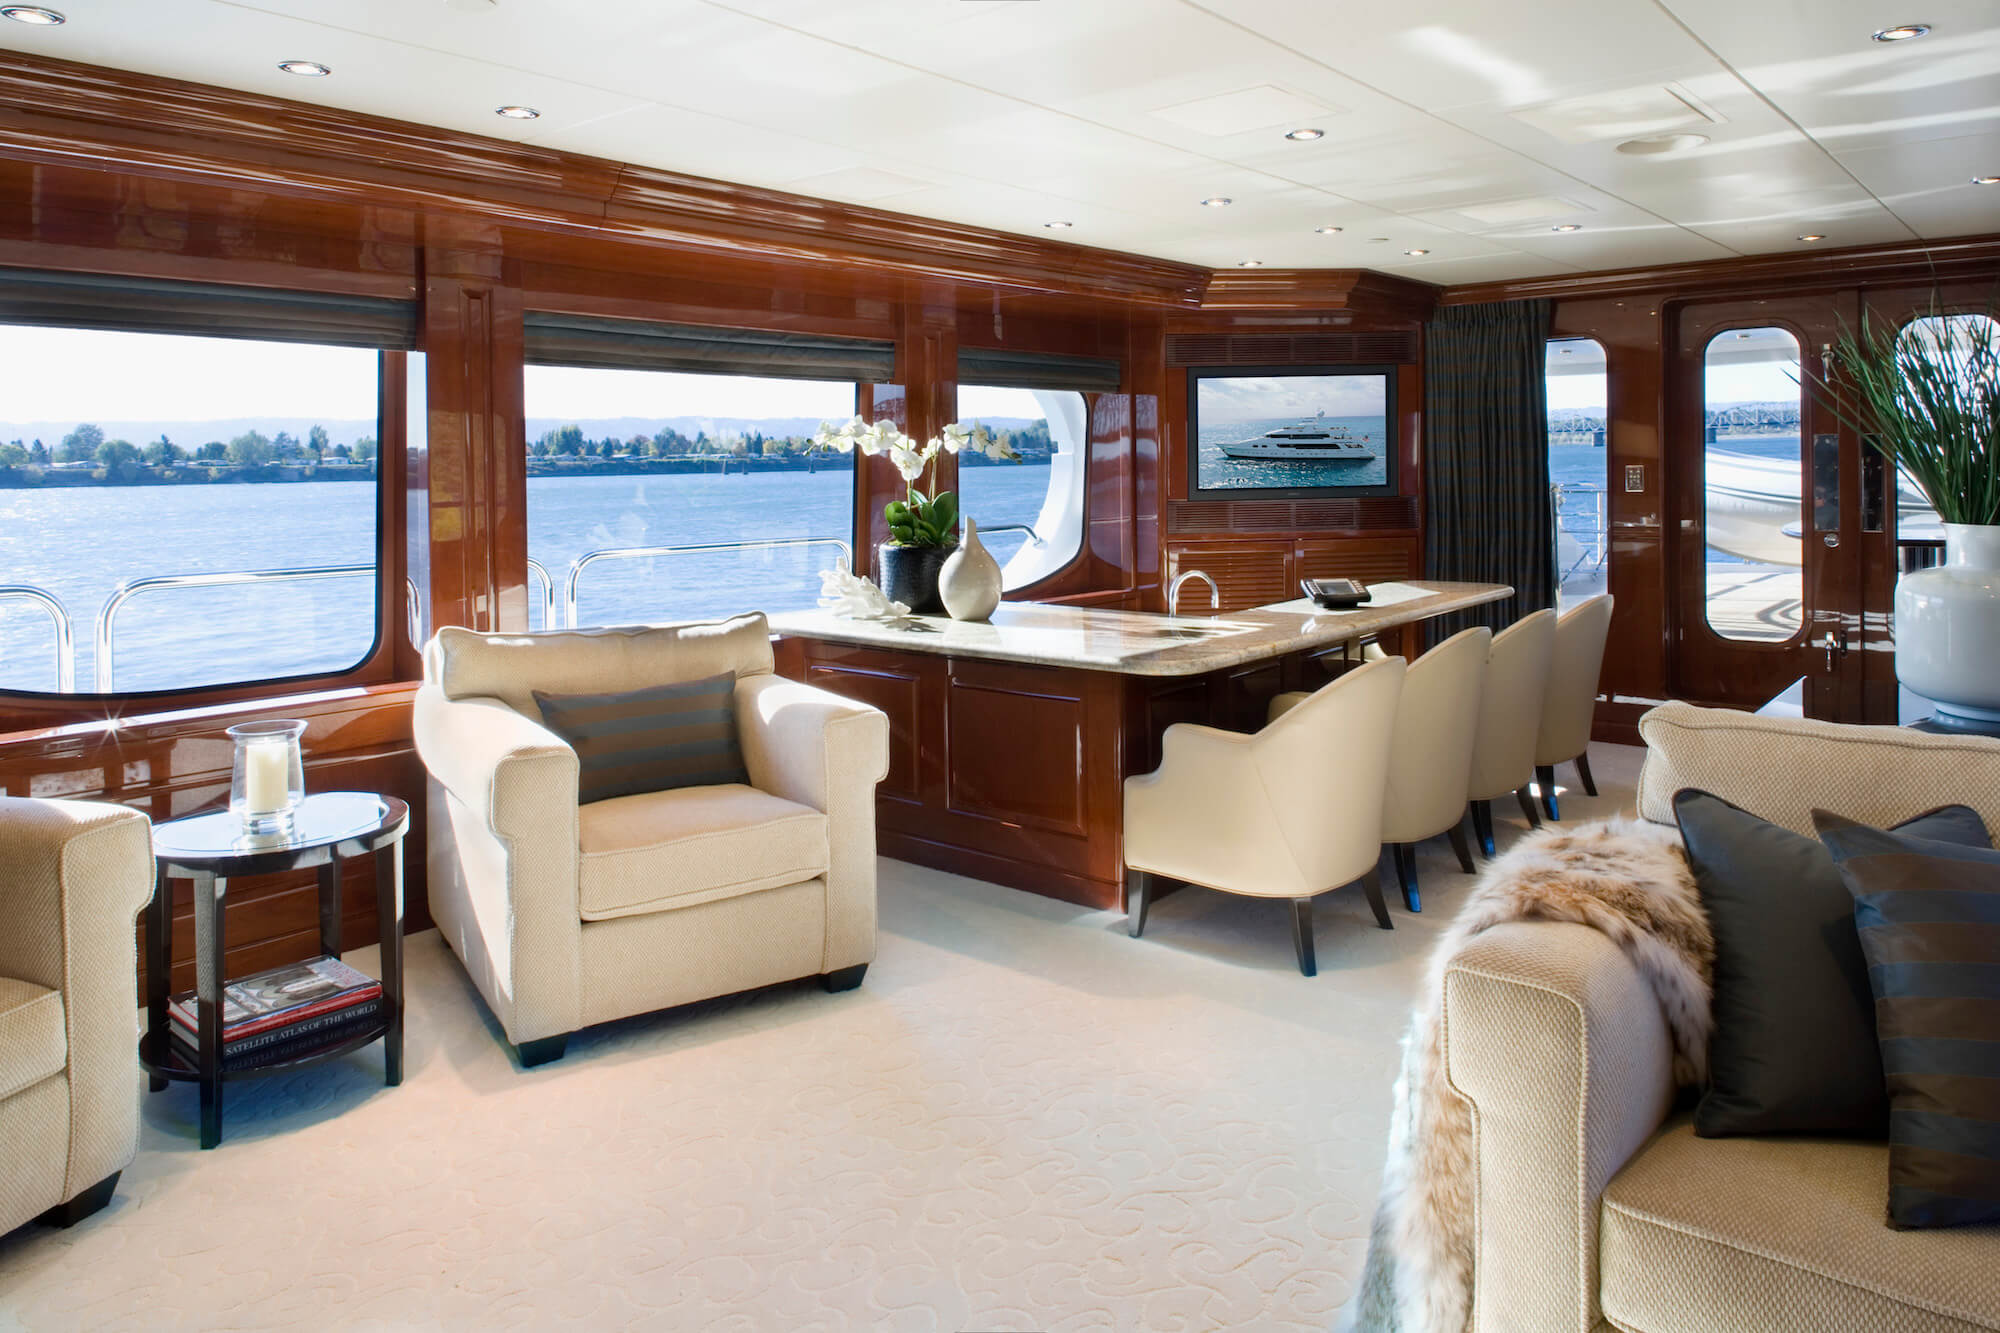 Marathon luxury yacht seating area with exterior view